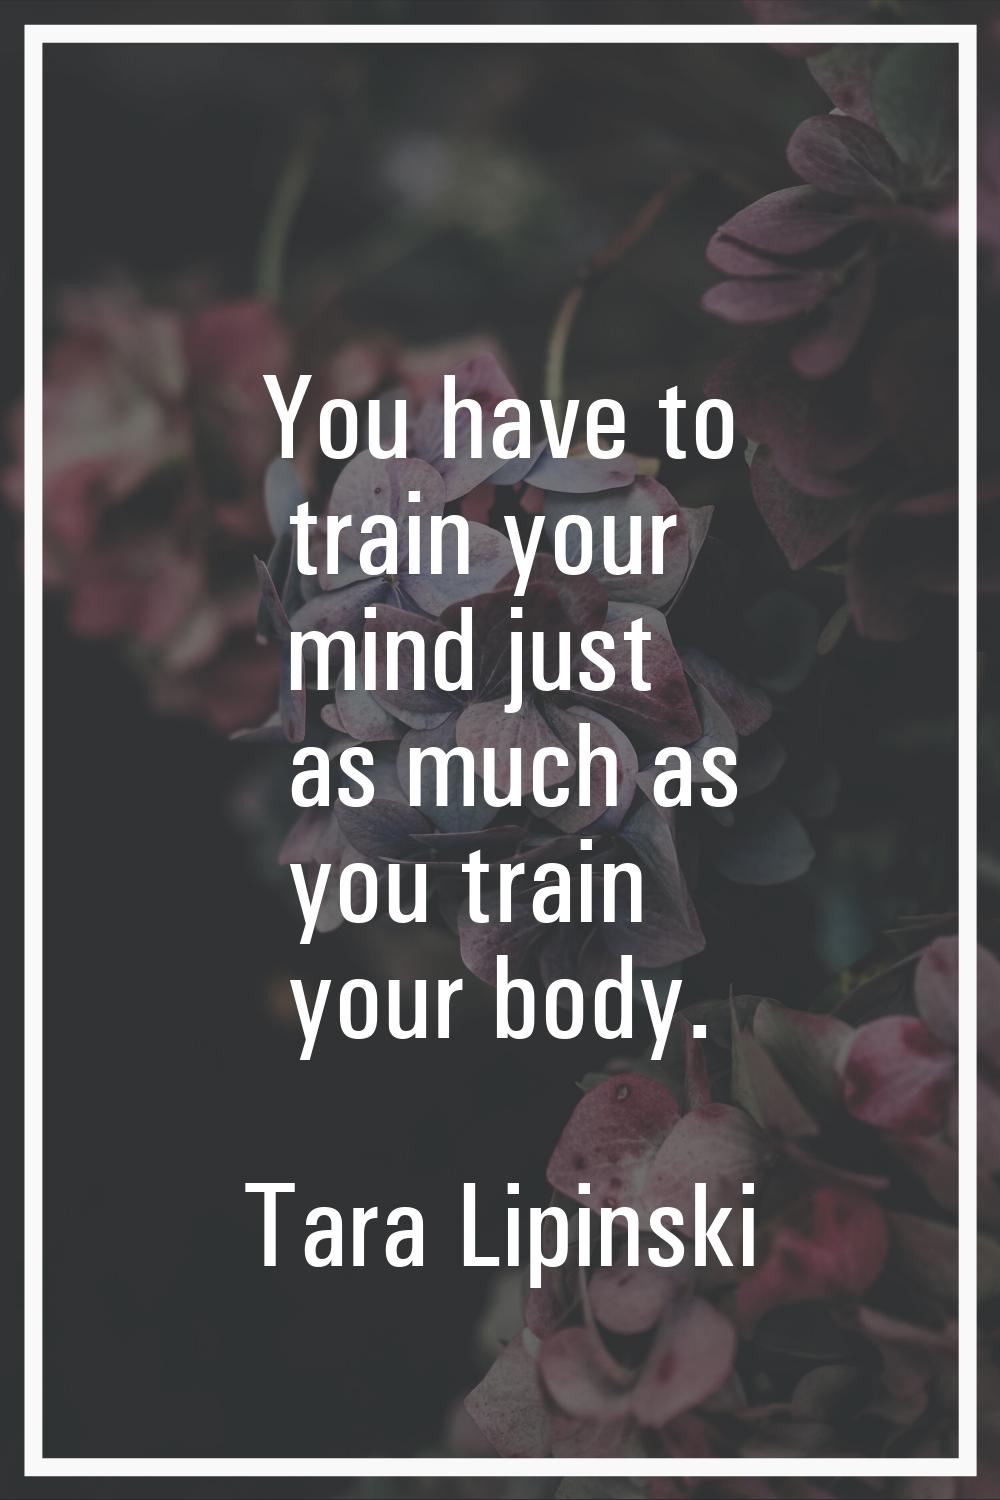 You have to train your mind just as much as you train your body.